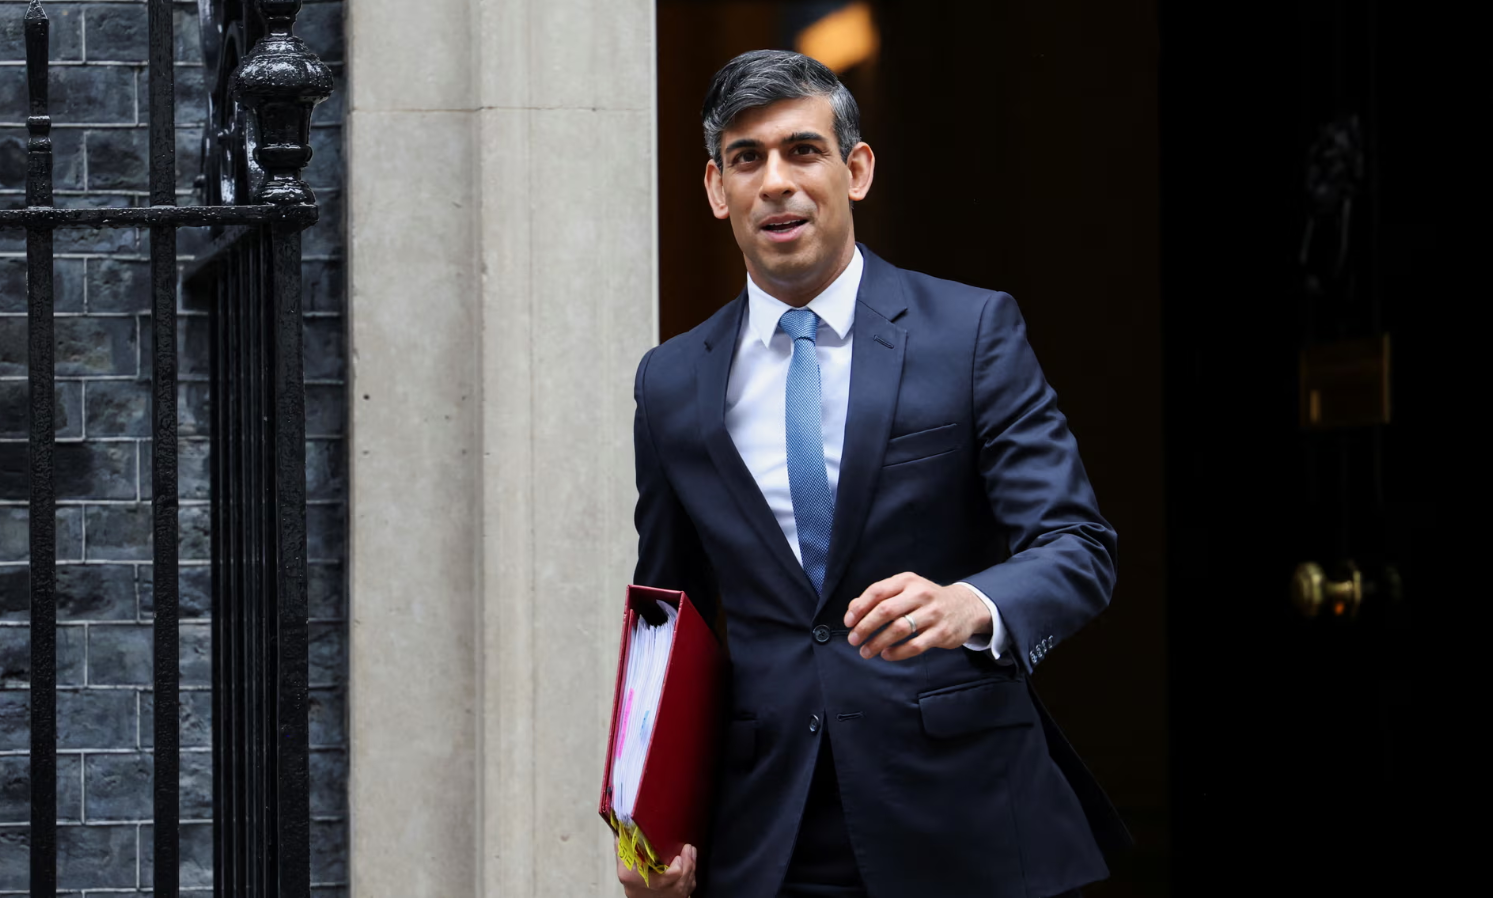 Rishi Sunak will call general election for July in surprise move – sources